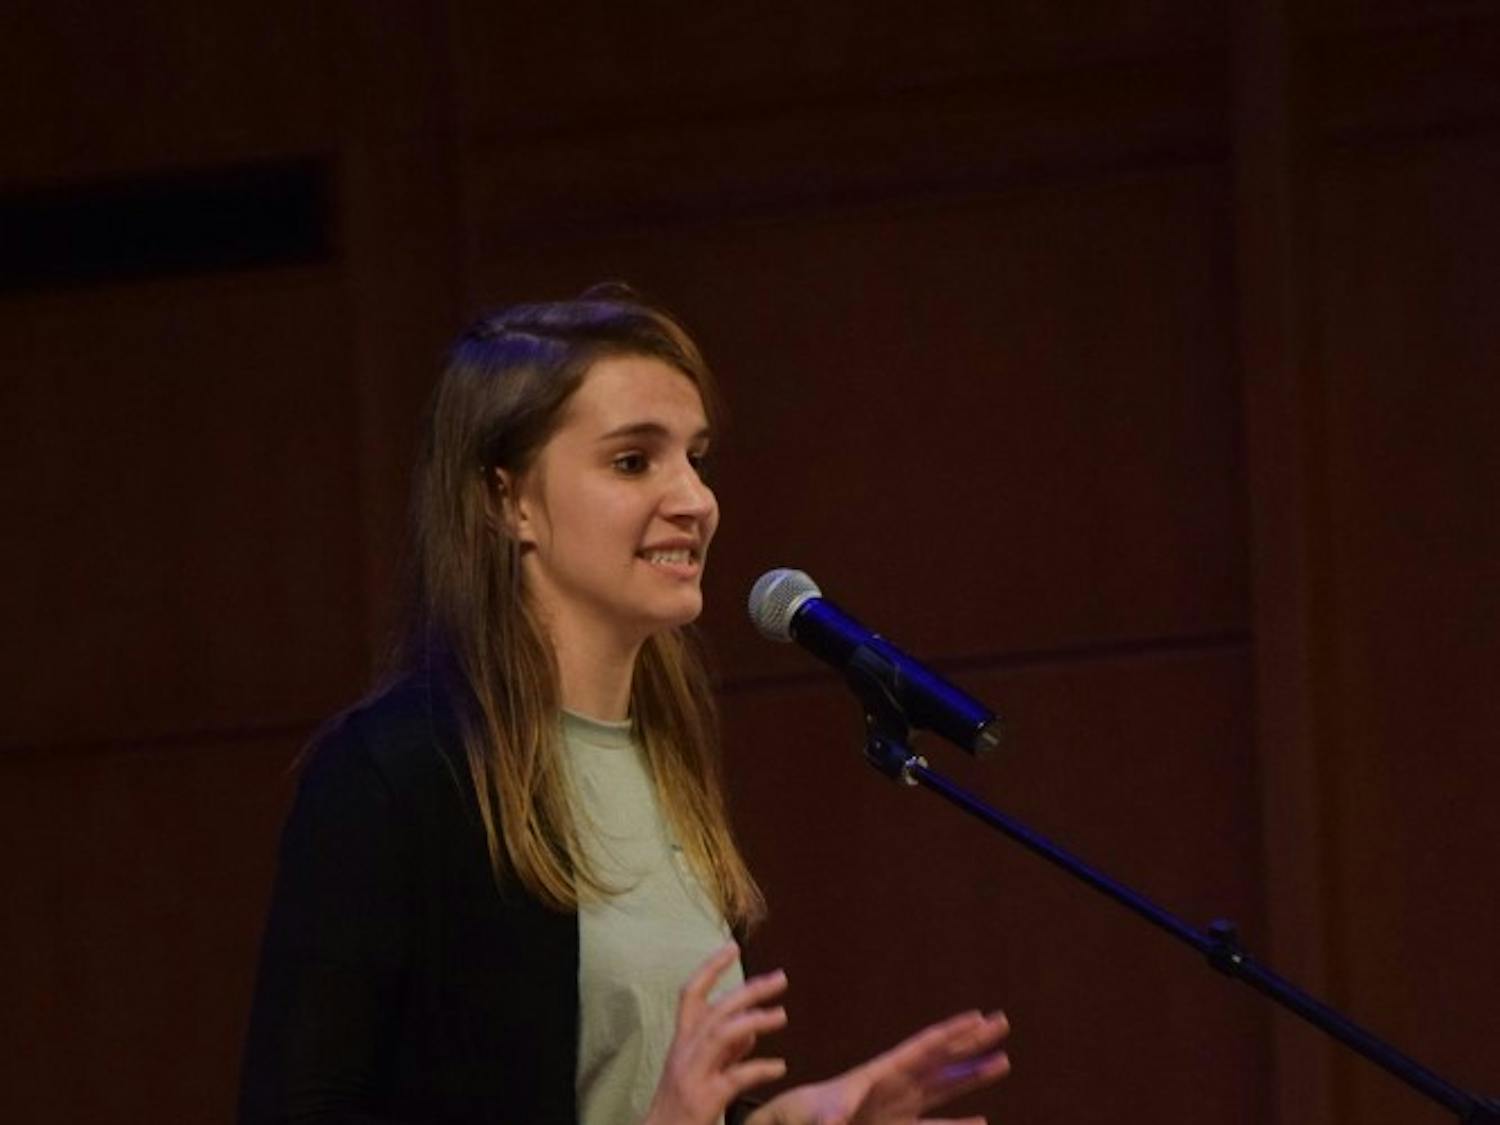 From anxious outsider to confident community member, Duke rising&nbsp;senior&nbsp;Jenna Peters&nbsp;shared a story of transformation and acceptance &mdash; and a little dancing.